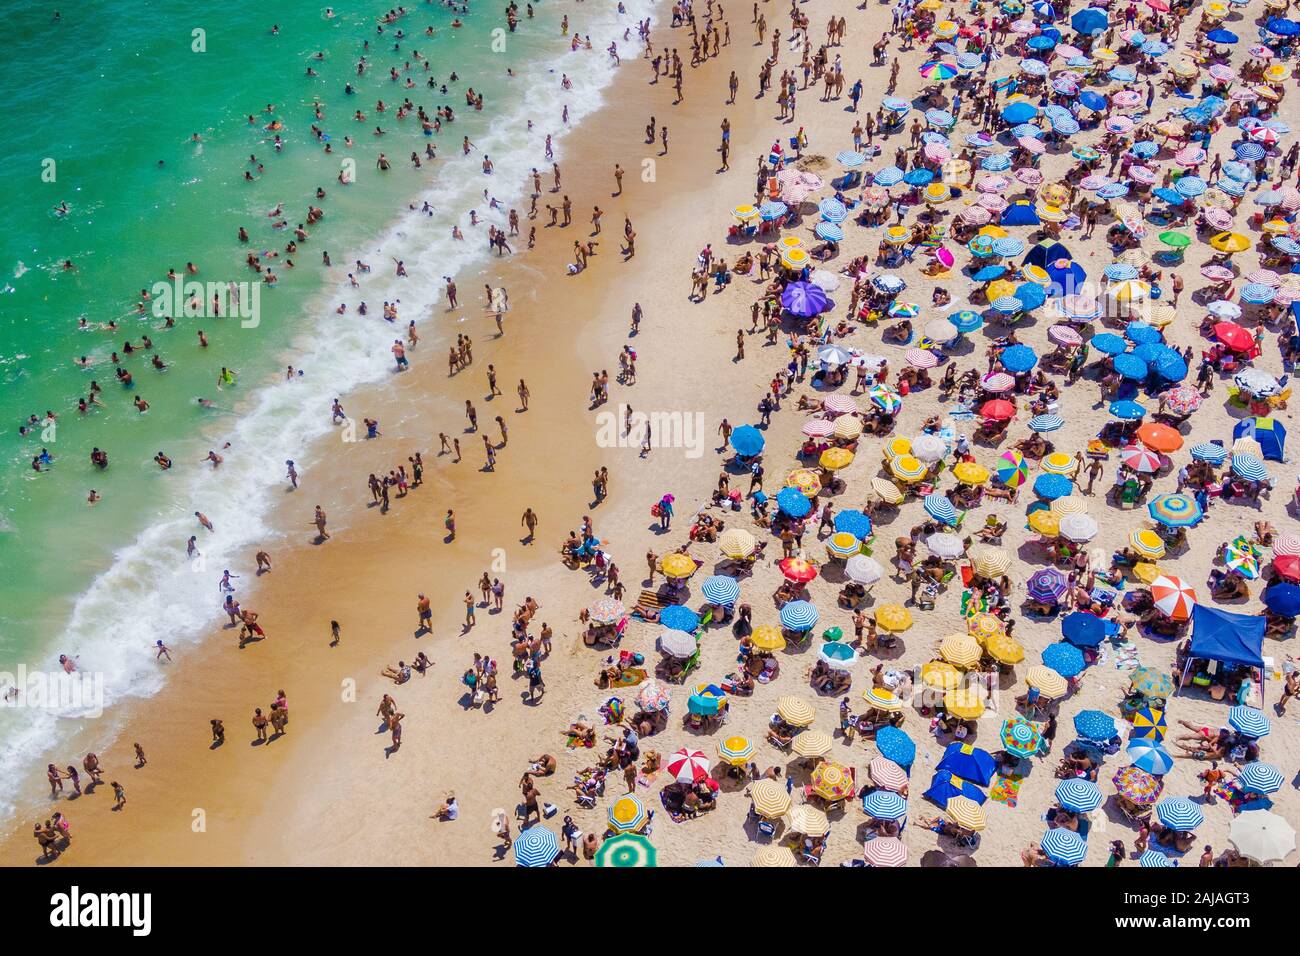 Rio de Janeiro, Brazil, aerial view of Copacabana Beach showing colourful umbrellas and people bathing in the ocean on a summer day. Stock Photo